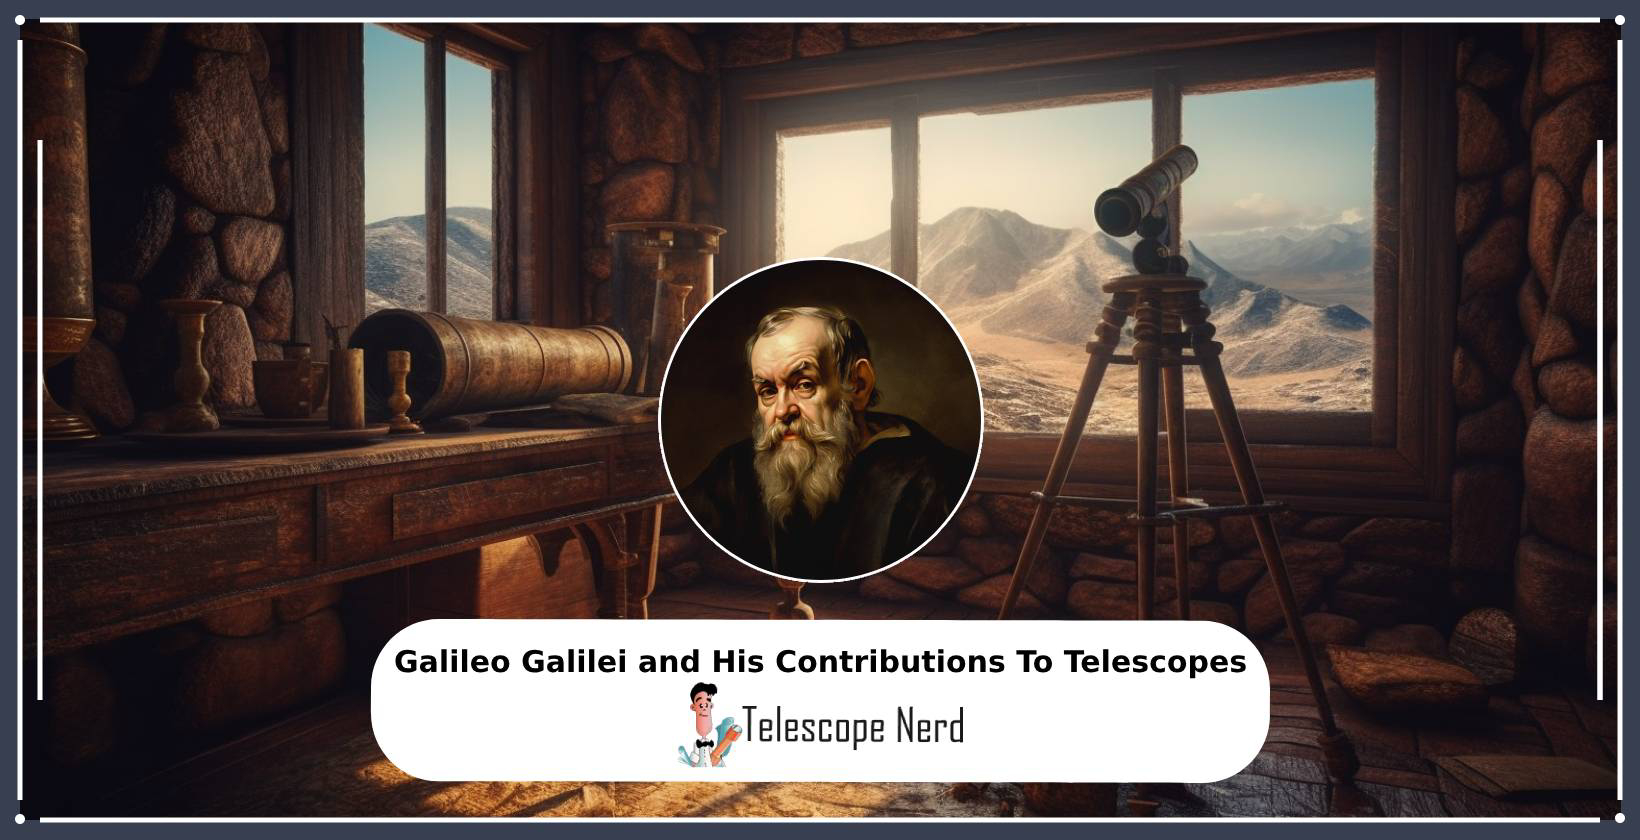 Galileo Galilei astronomer and his contributions to telescopes